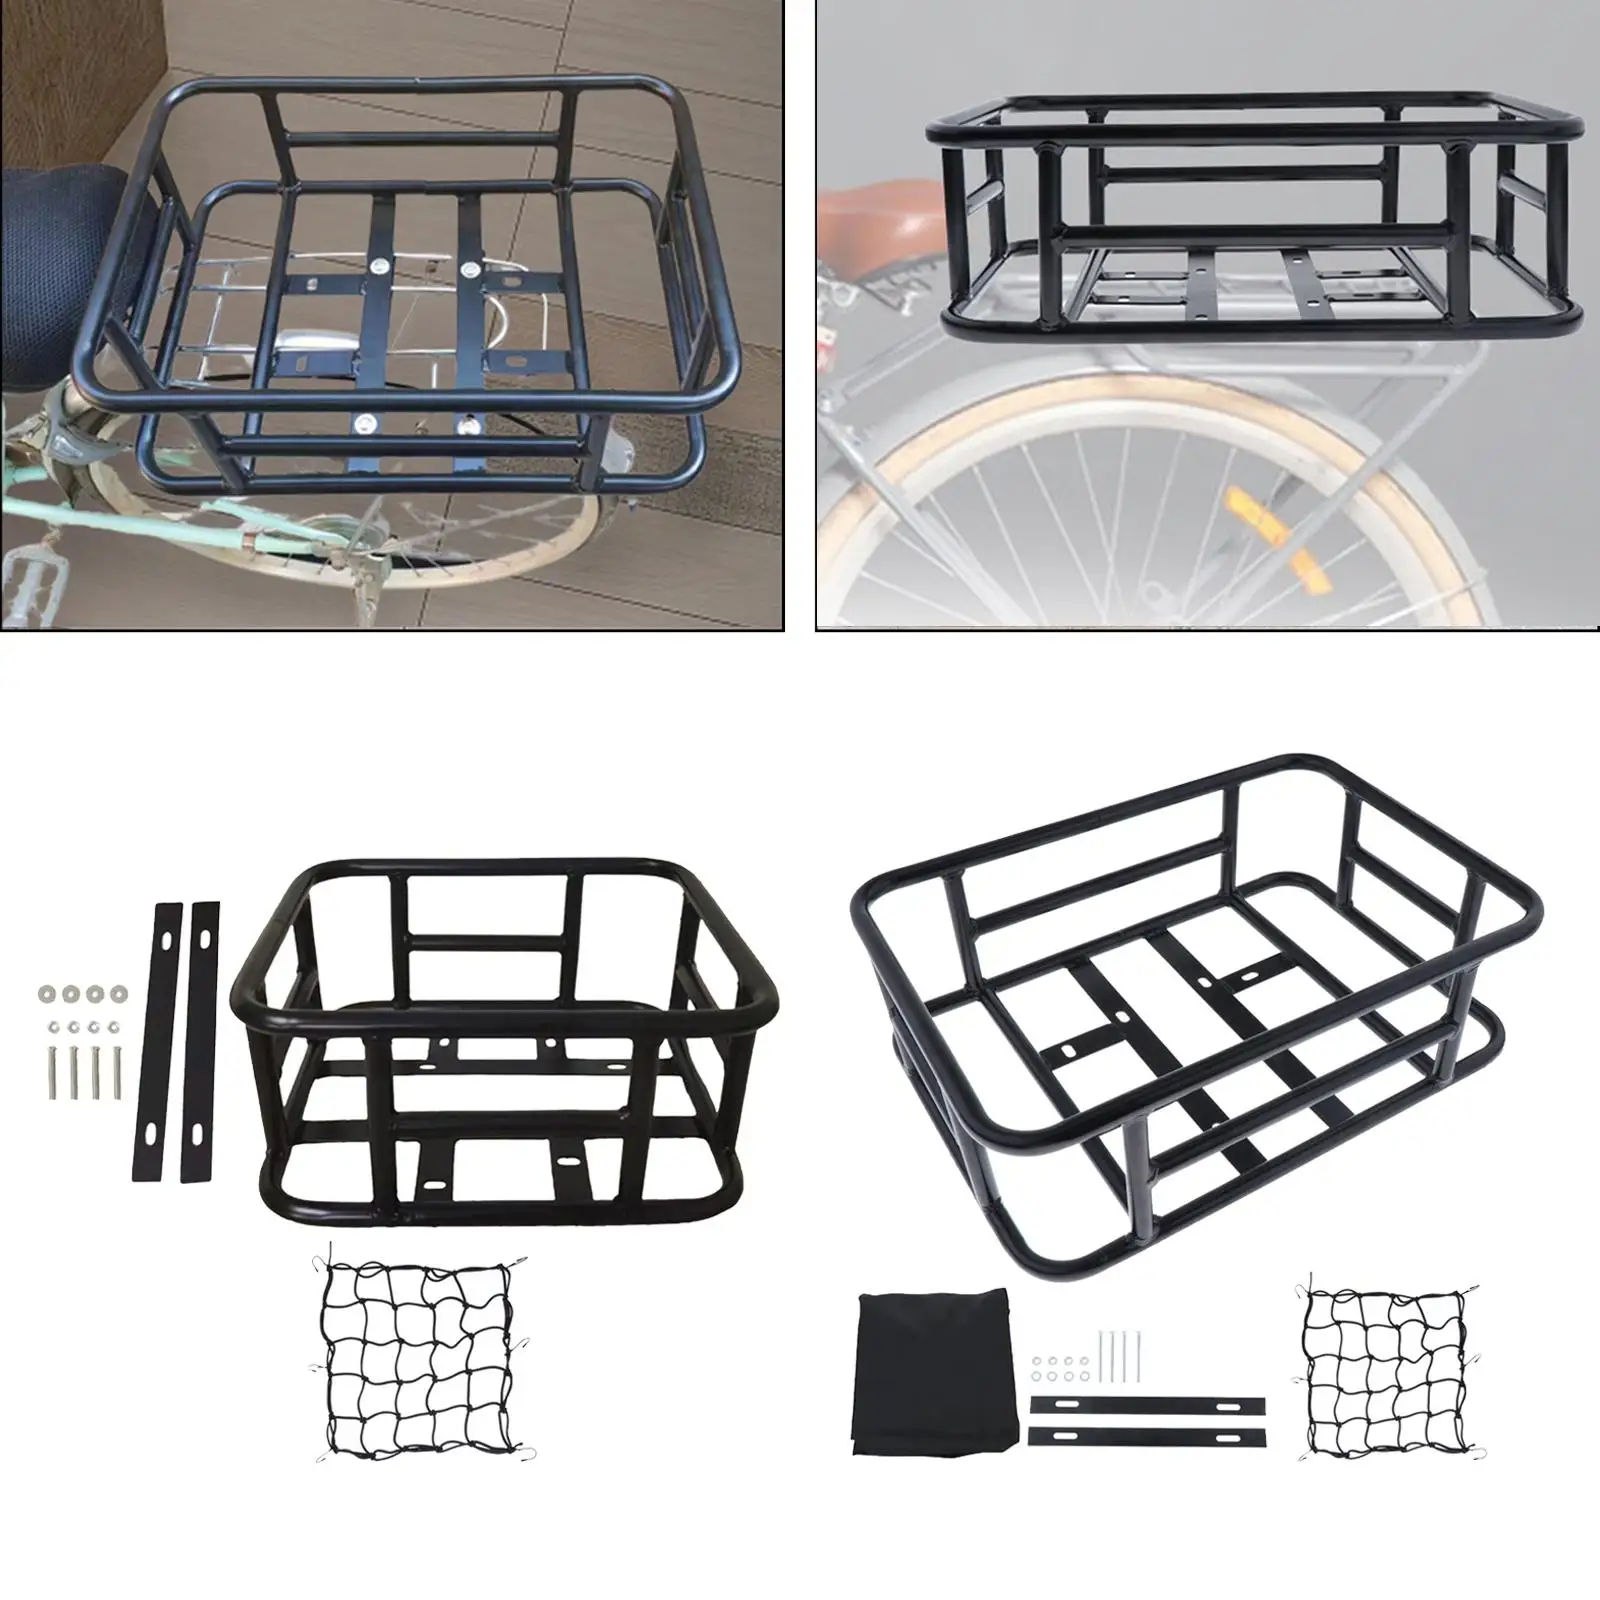 Rear Rack Bike Basket Bicycle Rear Cargo Rack Luggage Package Rack Iron Rear Bicycle Basket Pets Carrier for Shopping Luggage